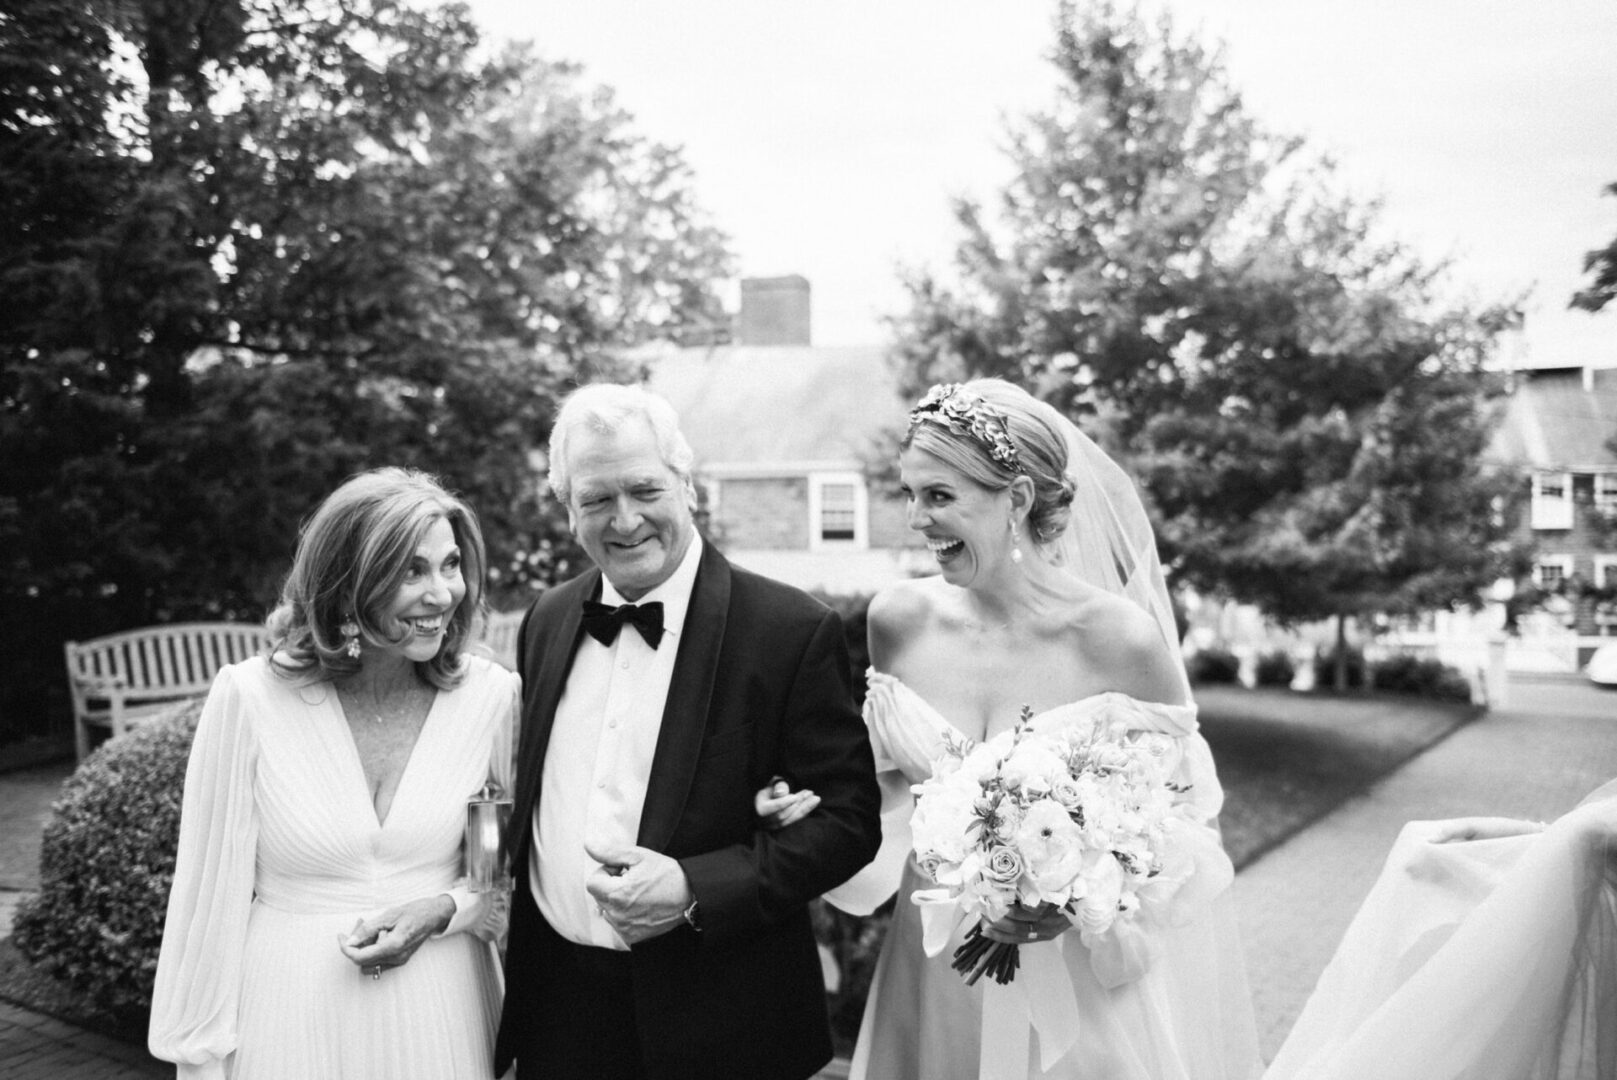 A candid moment between the bride and her parents